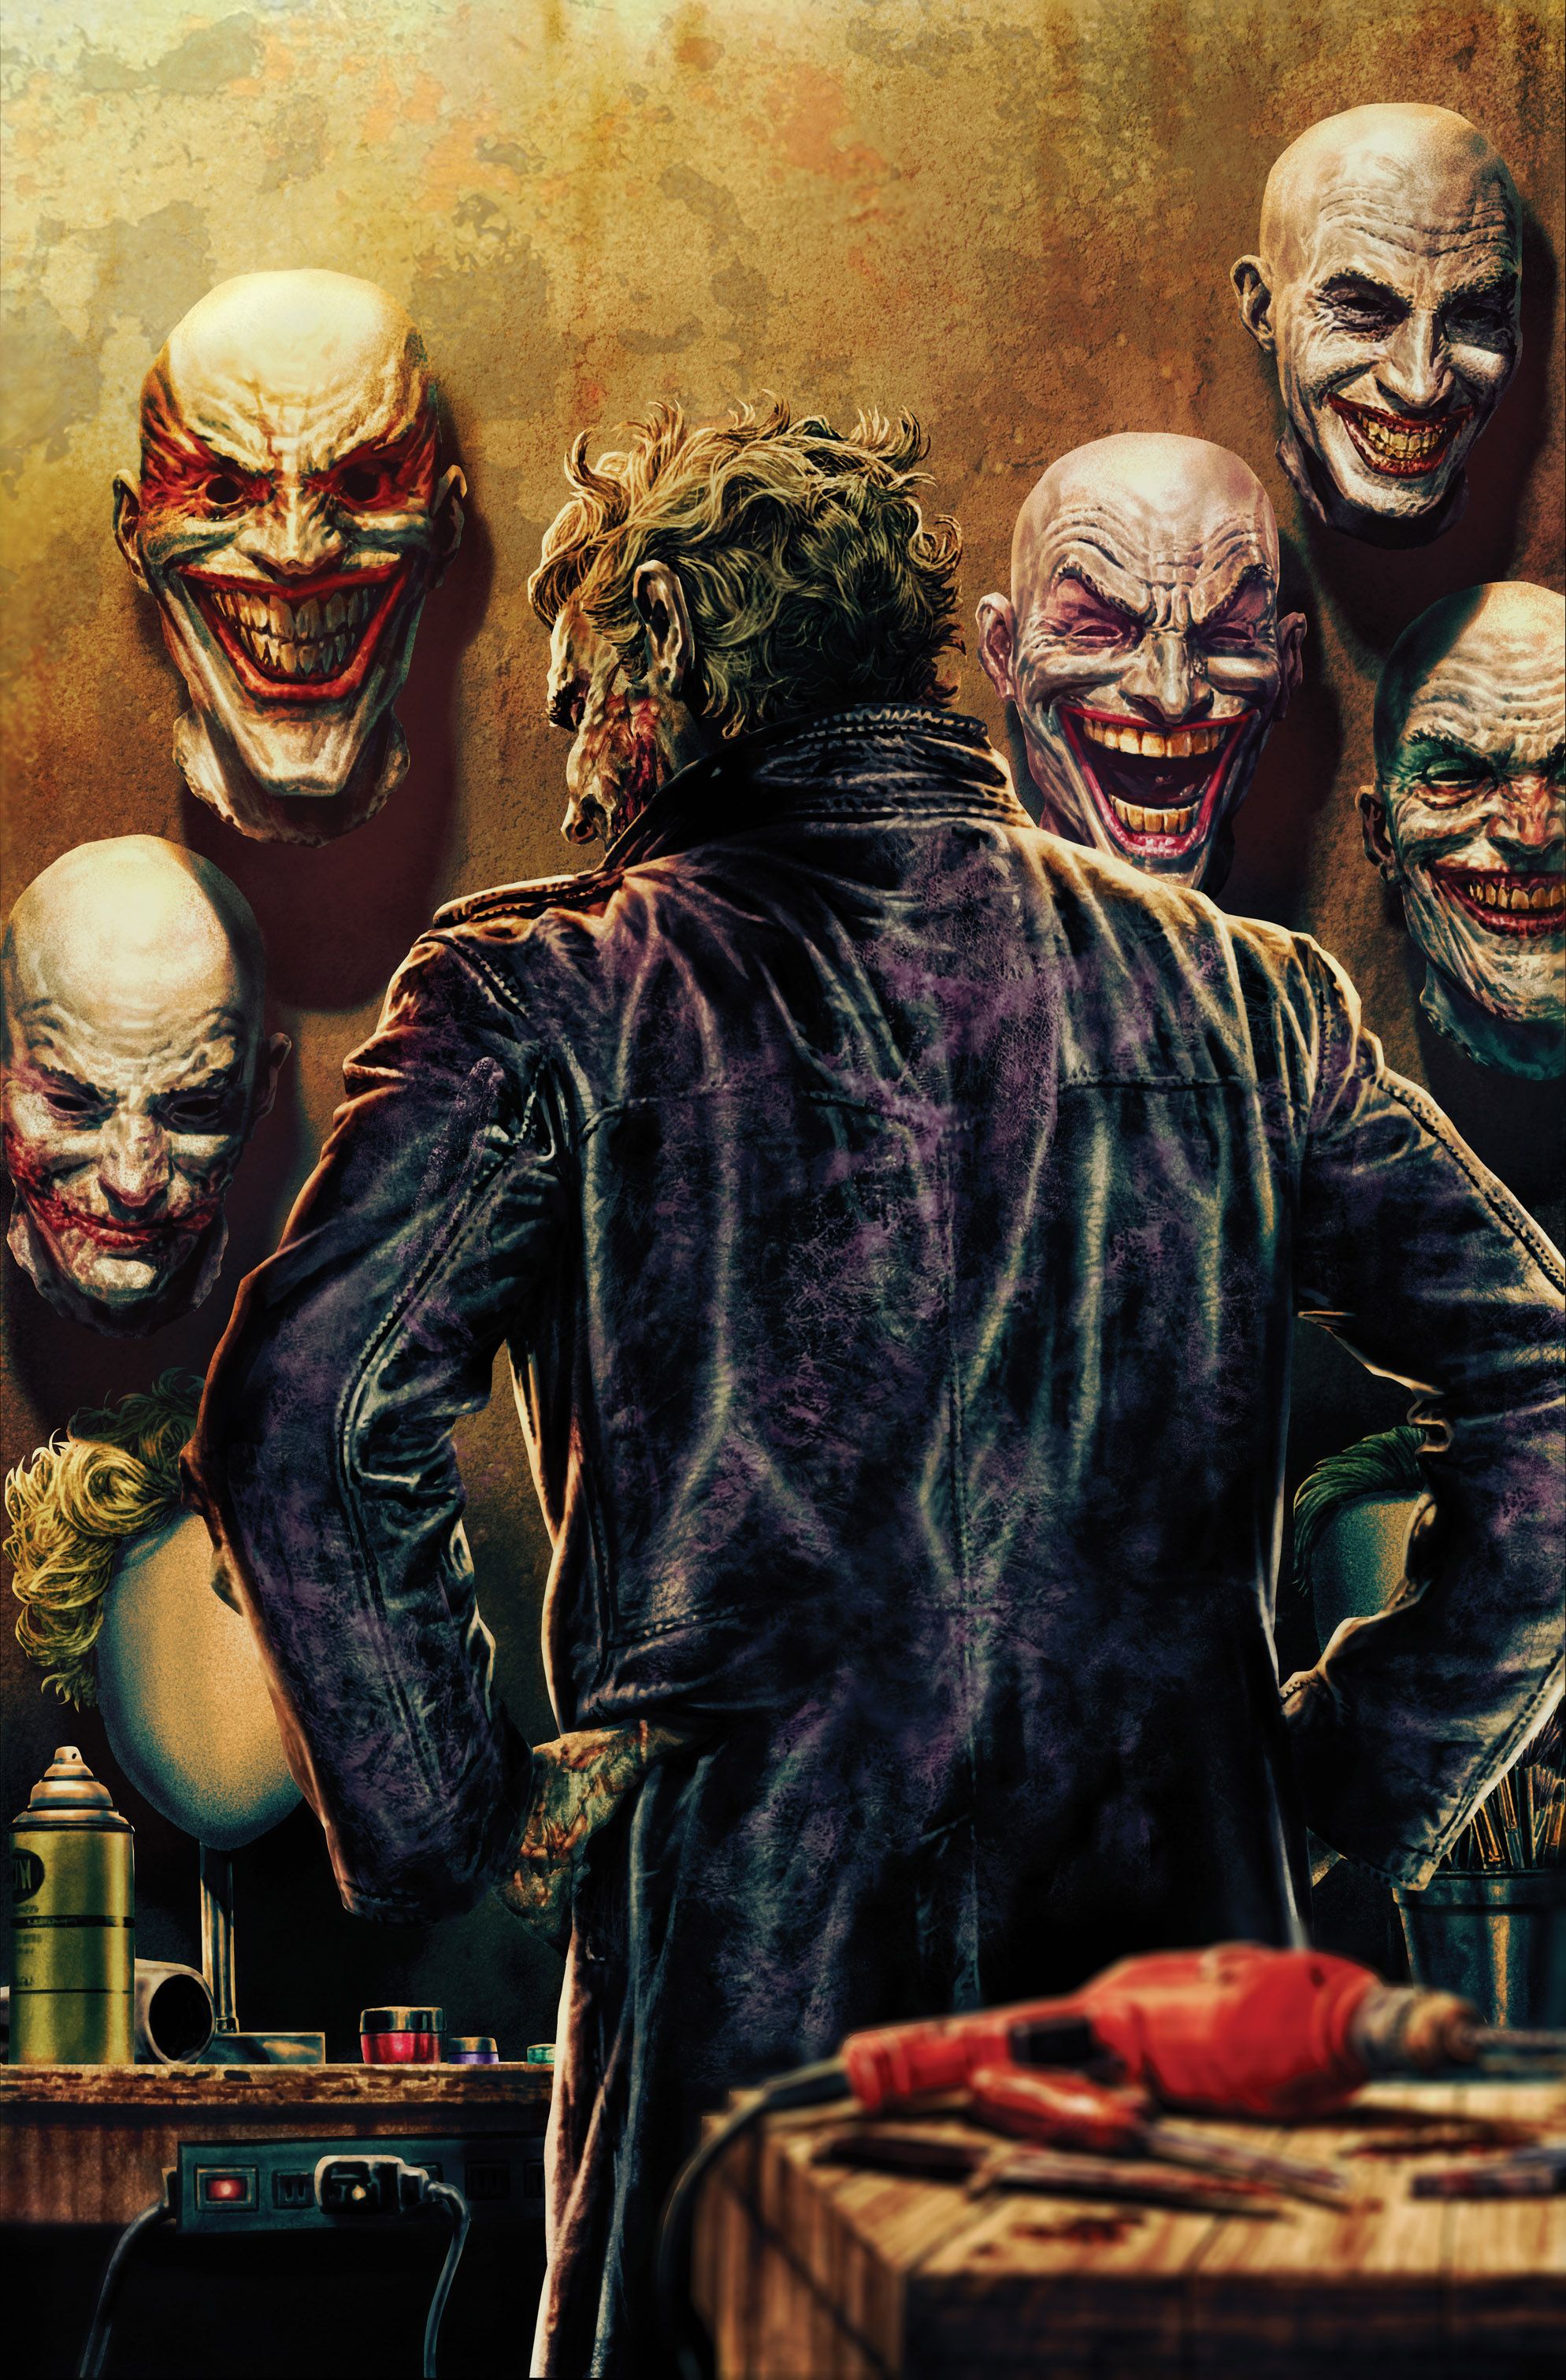 The Joker The Man Who Stopped Laughing 5 Open to Order Variant (Bermejo)